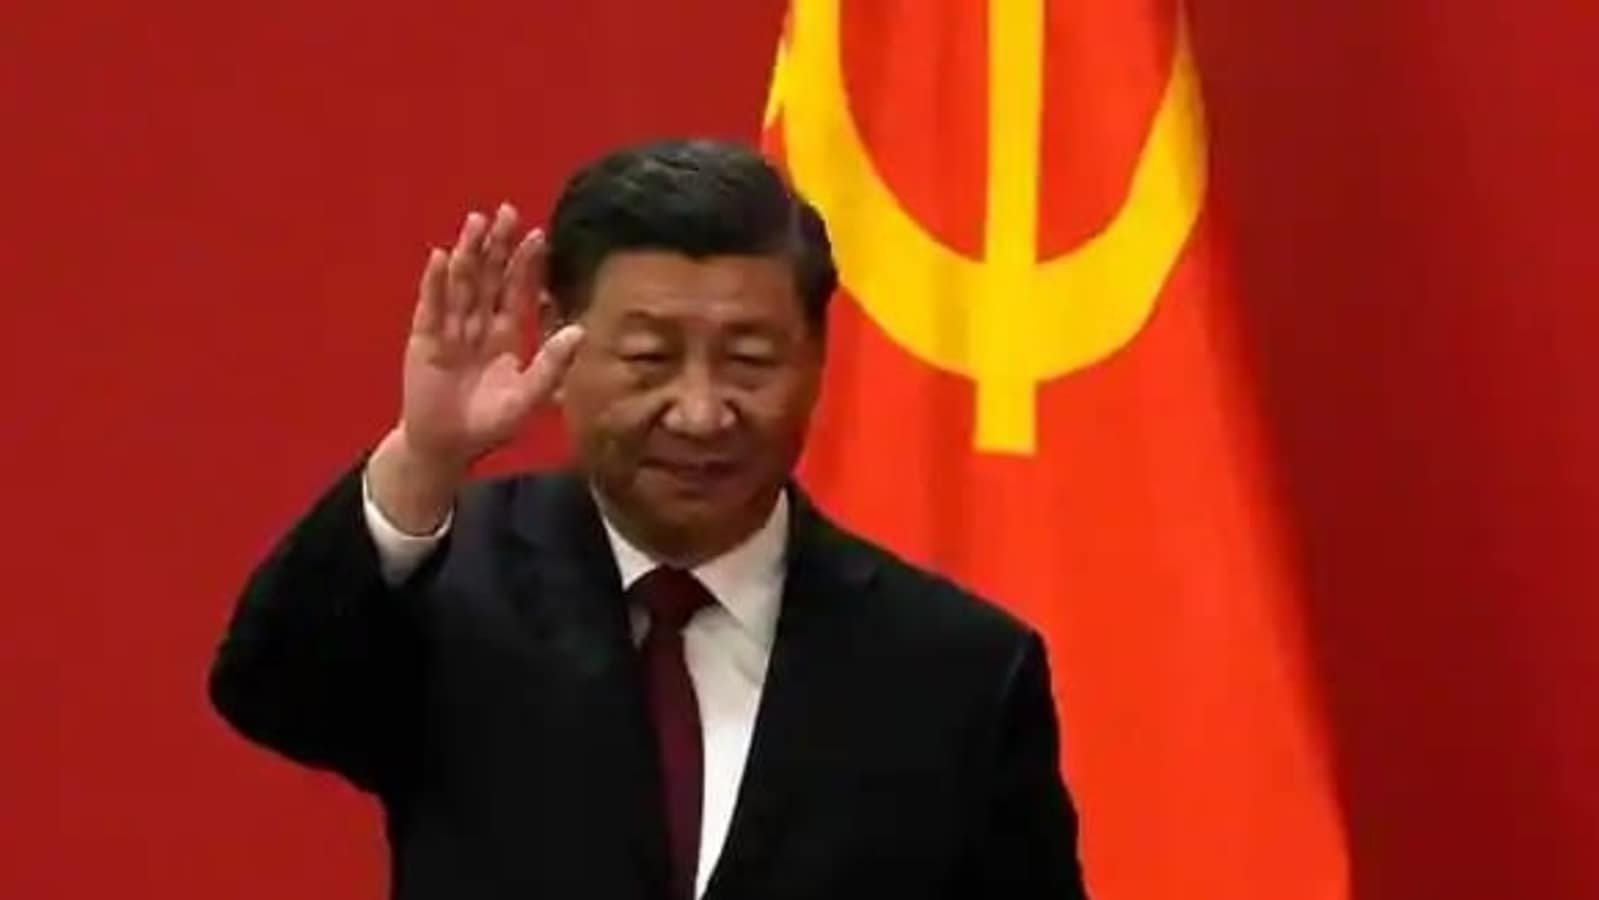 China masses take Covid fight into own hands as Xi sits back